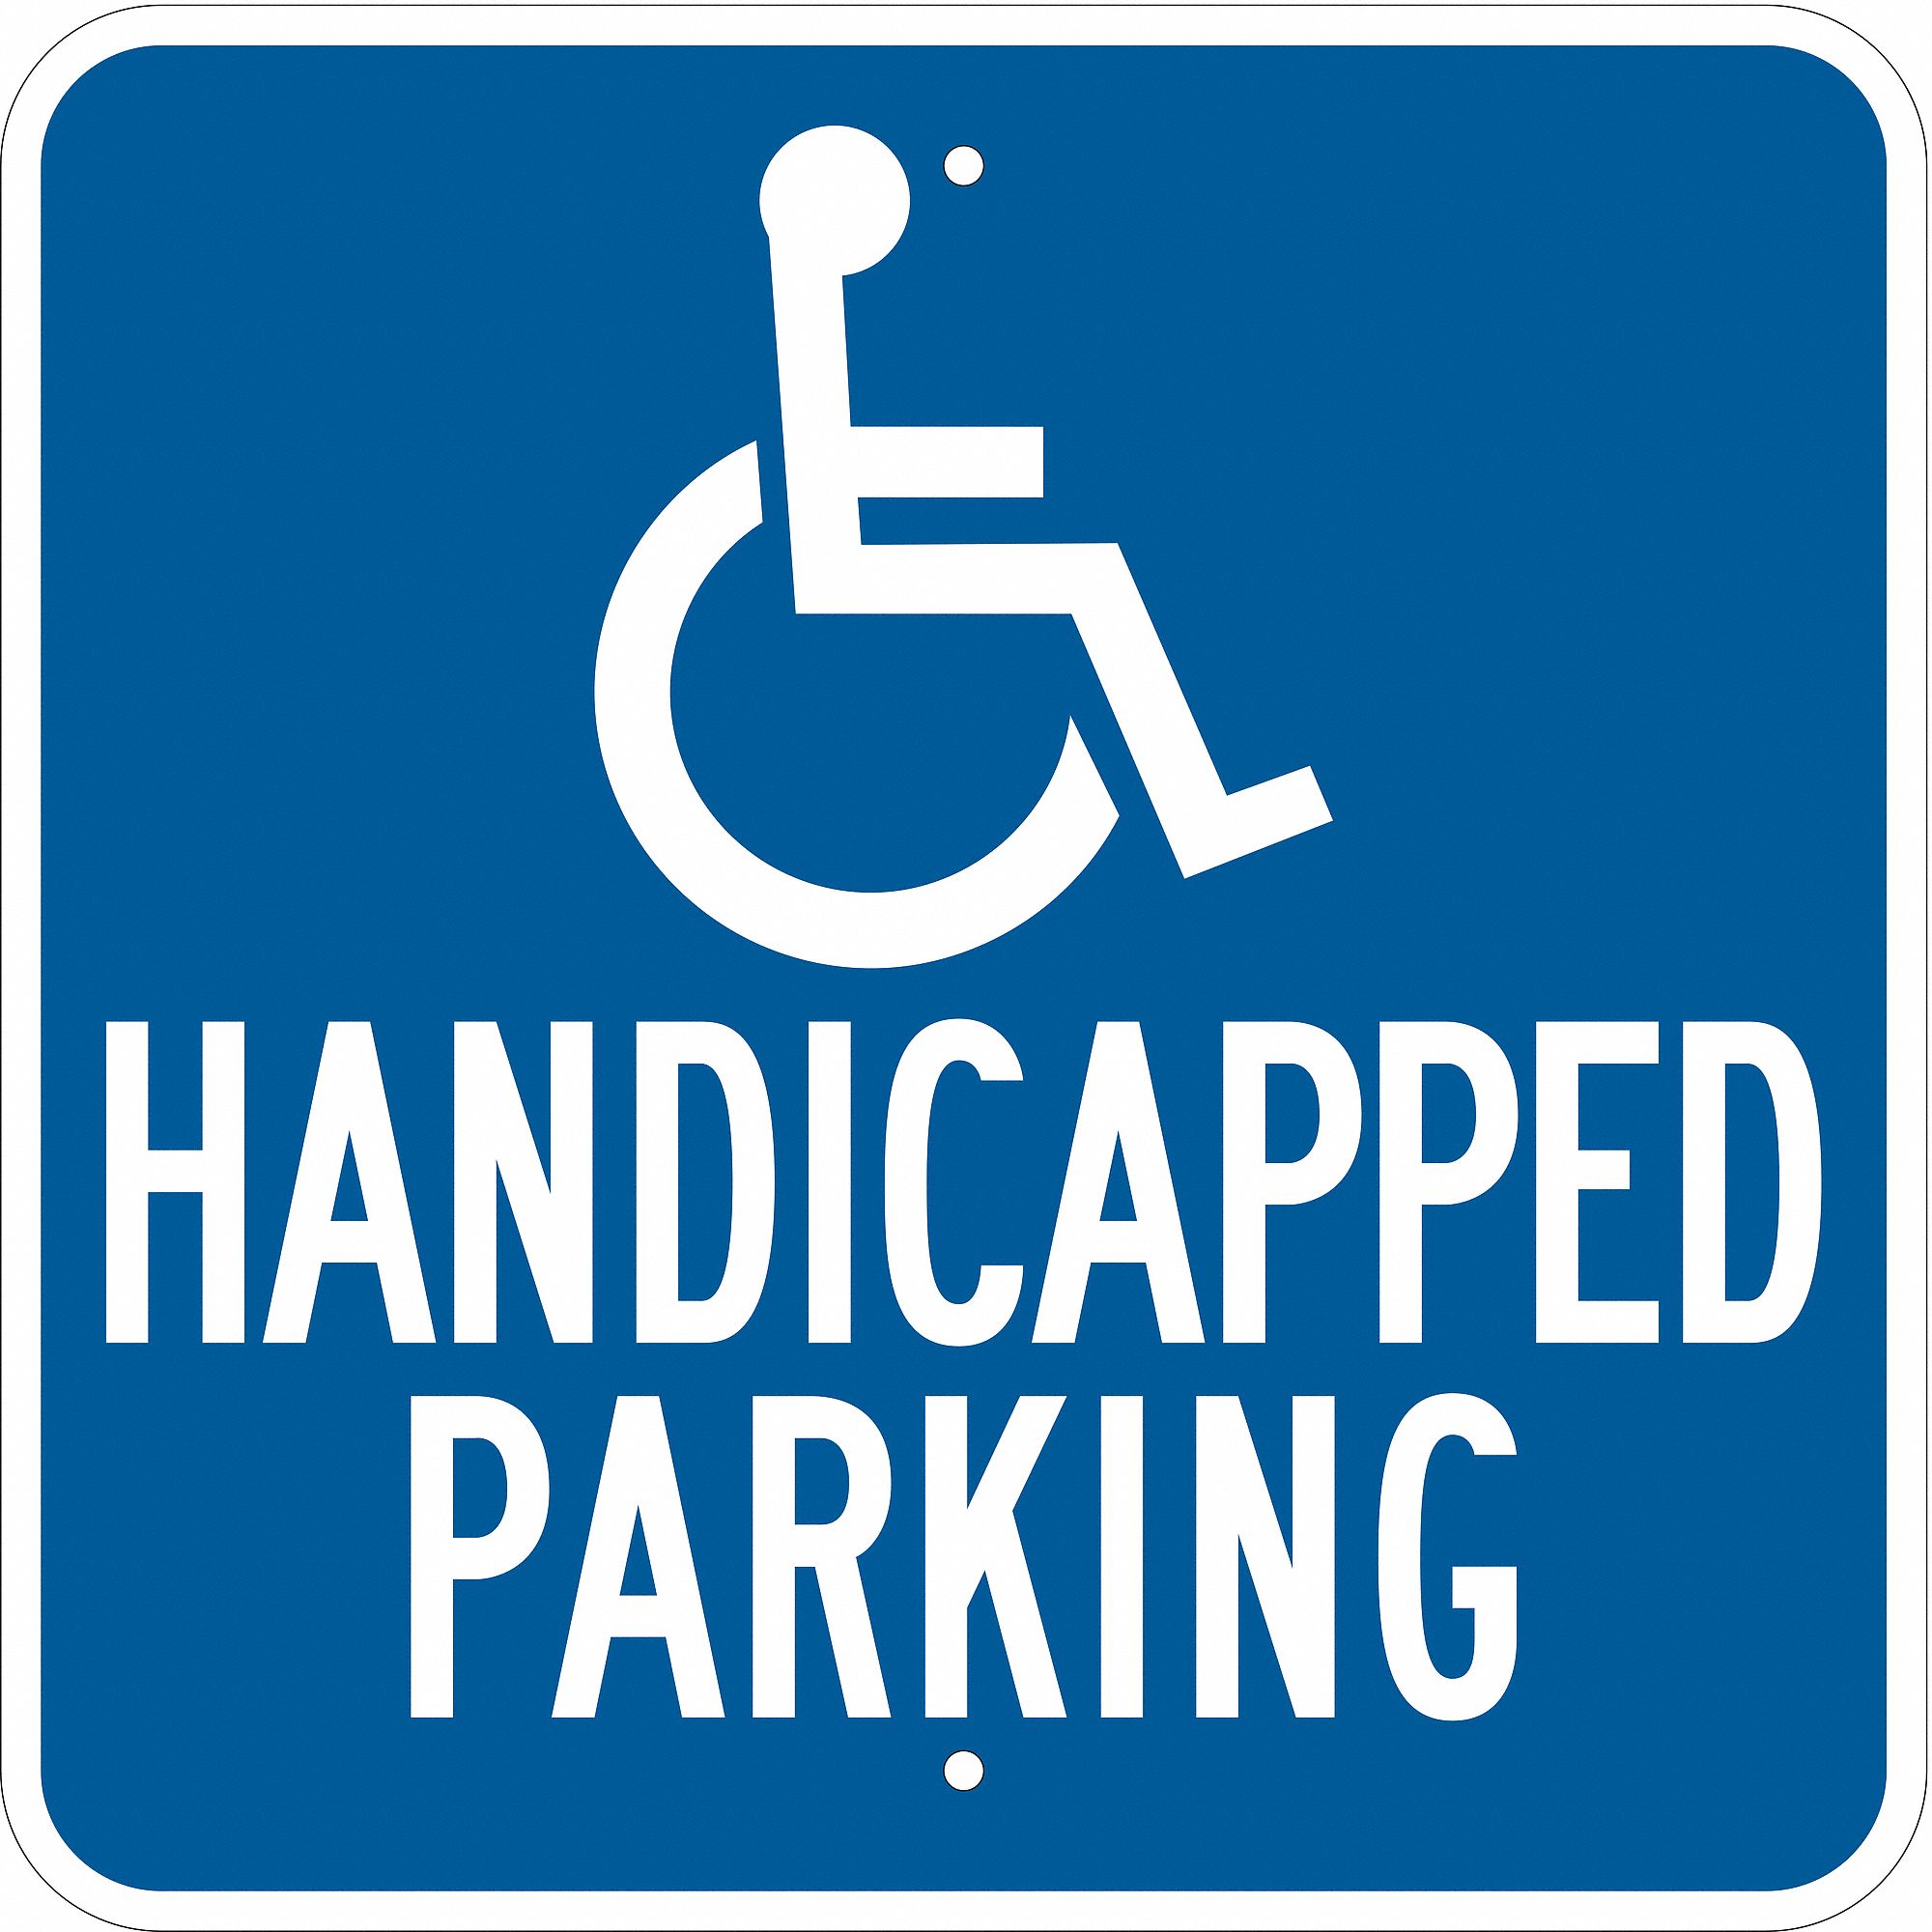 Text and SymbolHandicapped Parking Engineer Grade Aluminum, Handicap Parking Sign Height 18